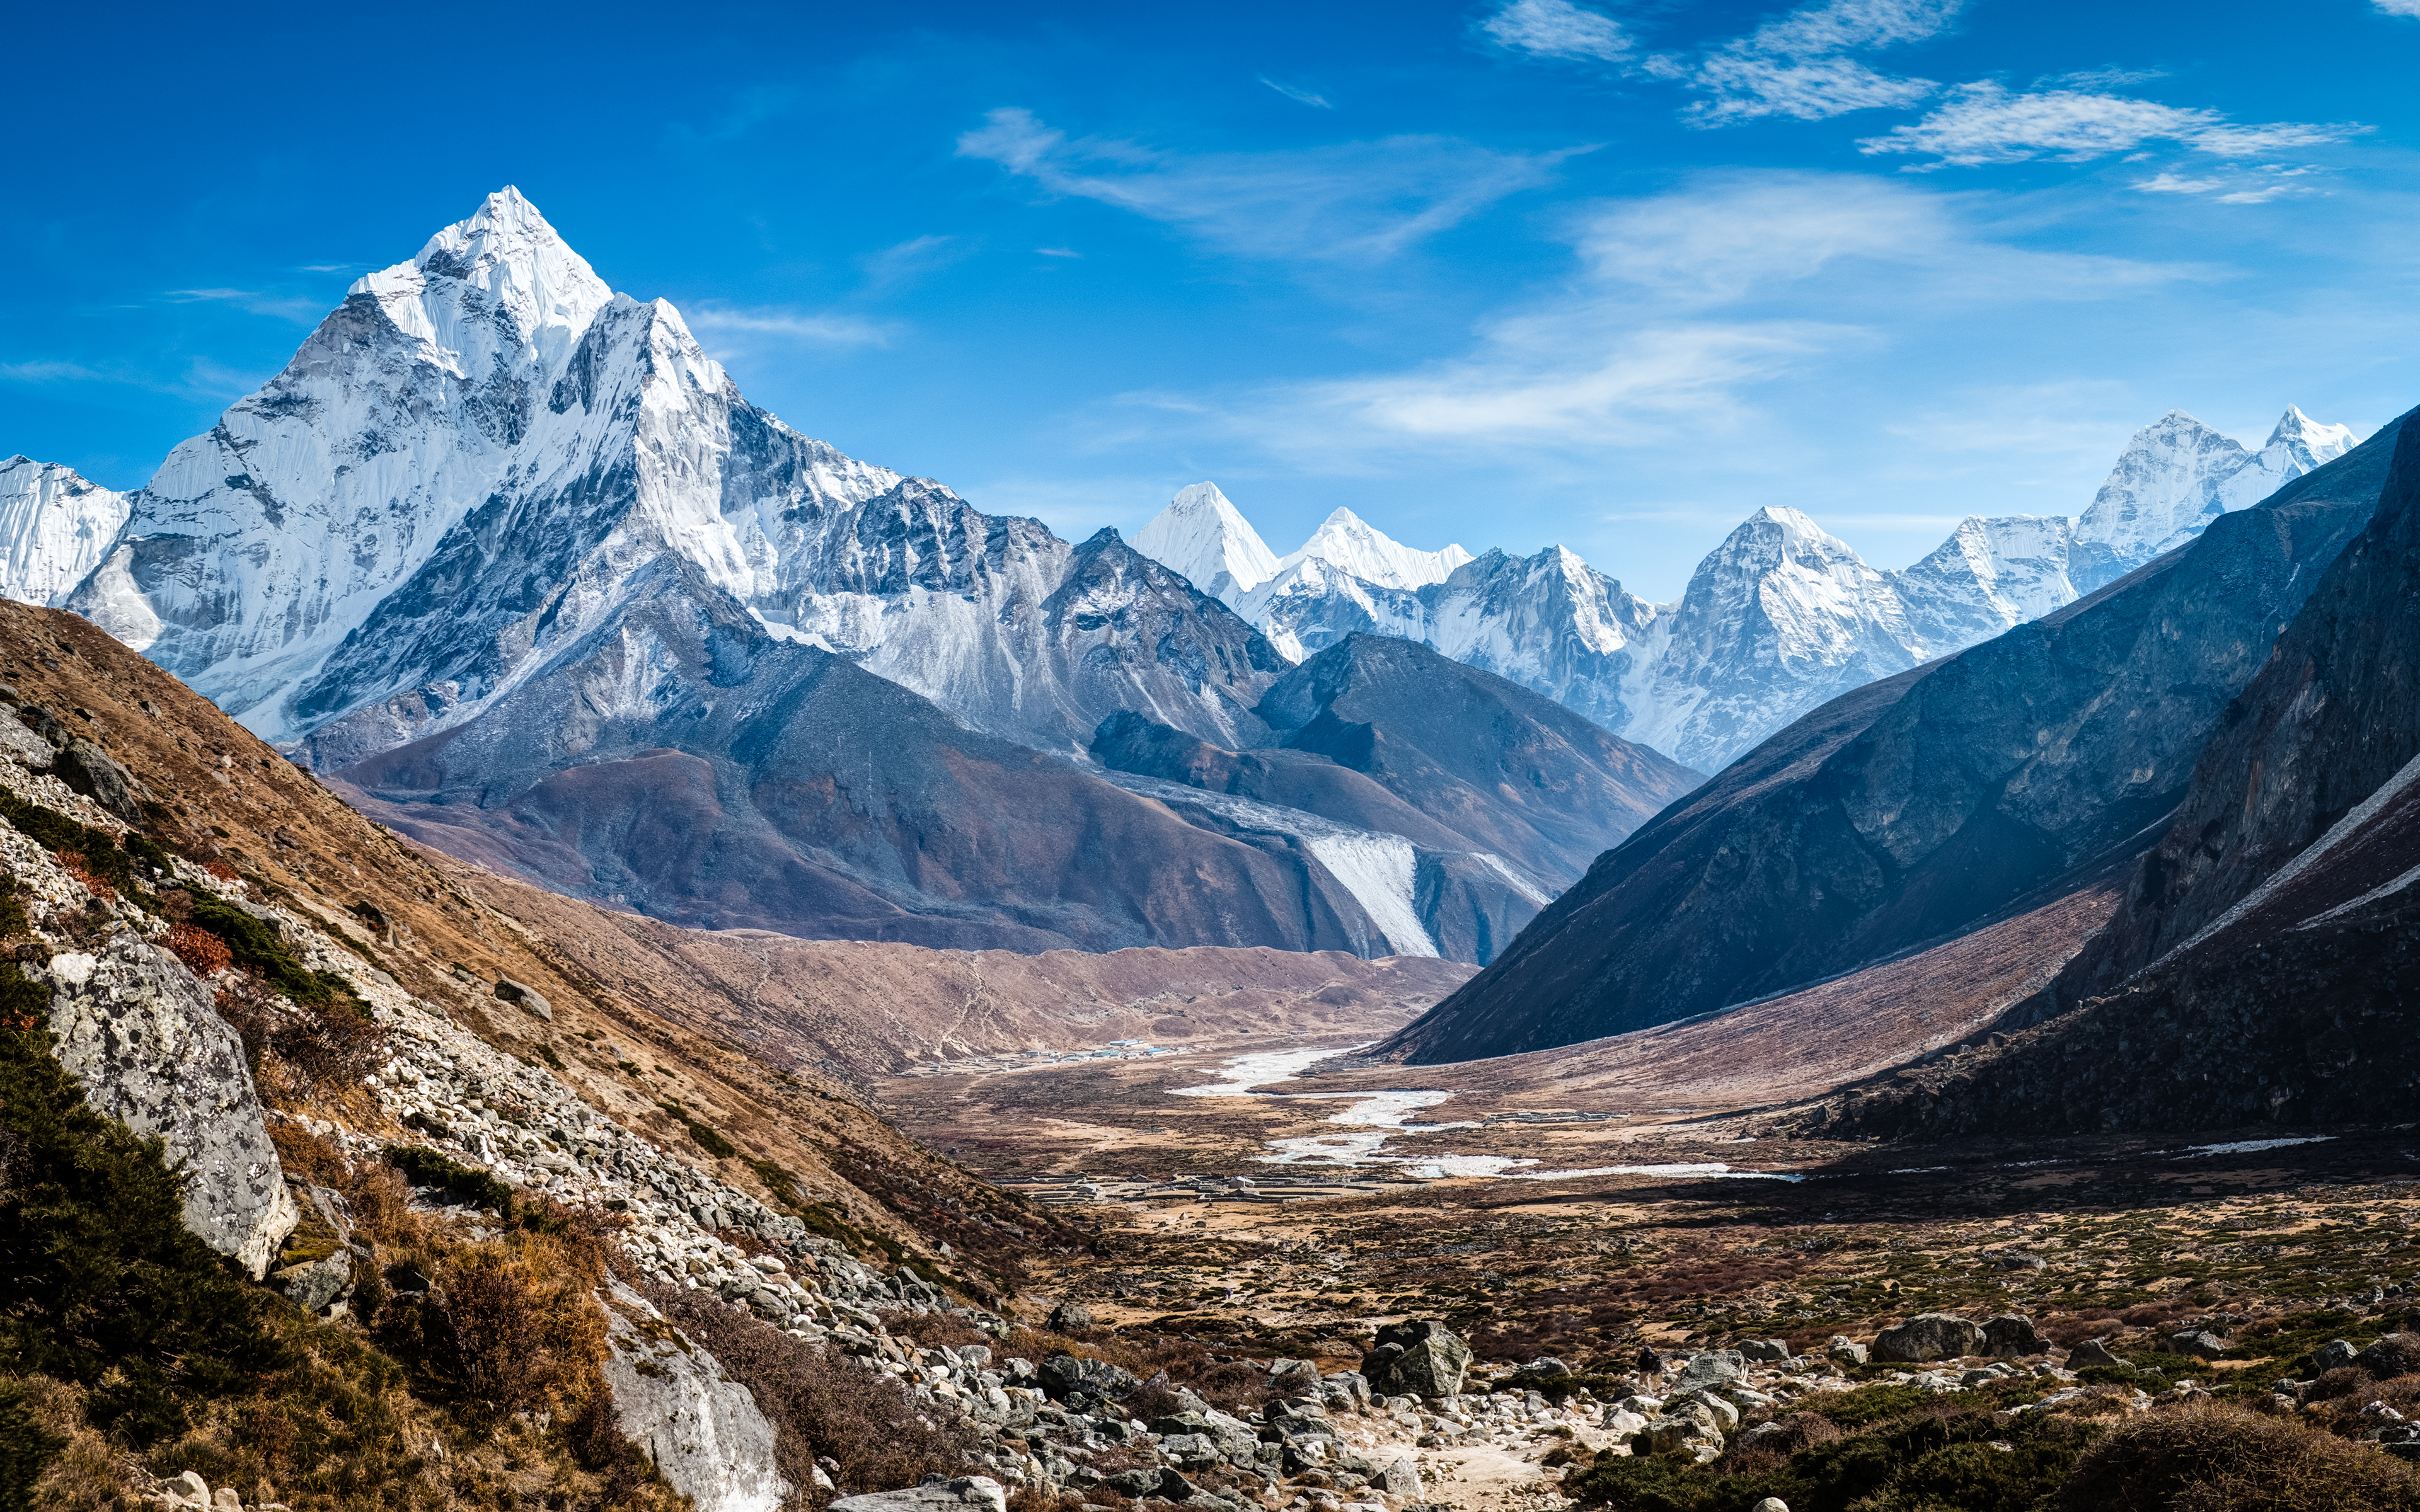 Nature___Mountains_Mount_Ama_Dablam_in_the_Himalayas_061144_.jpg